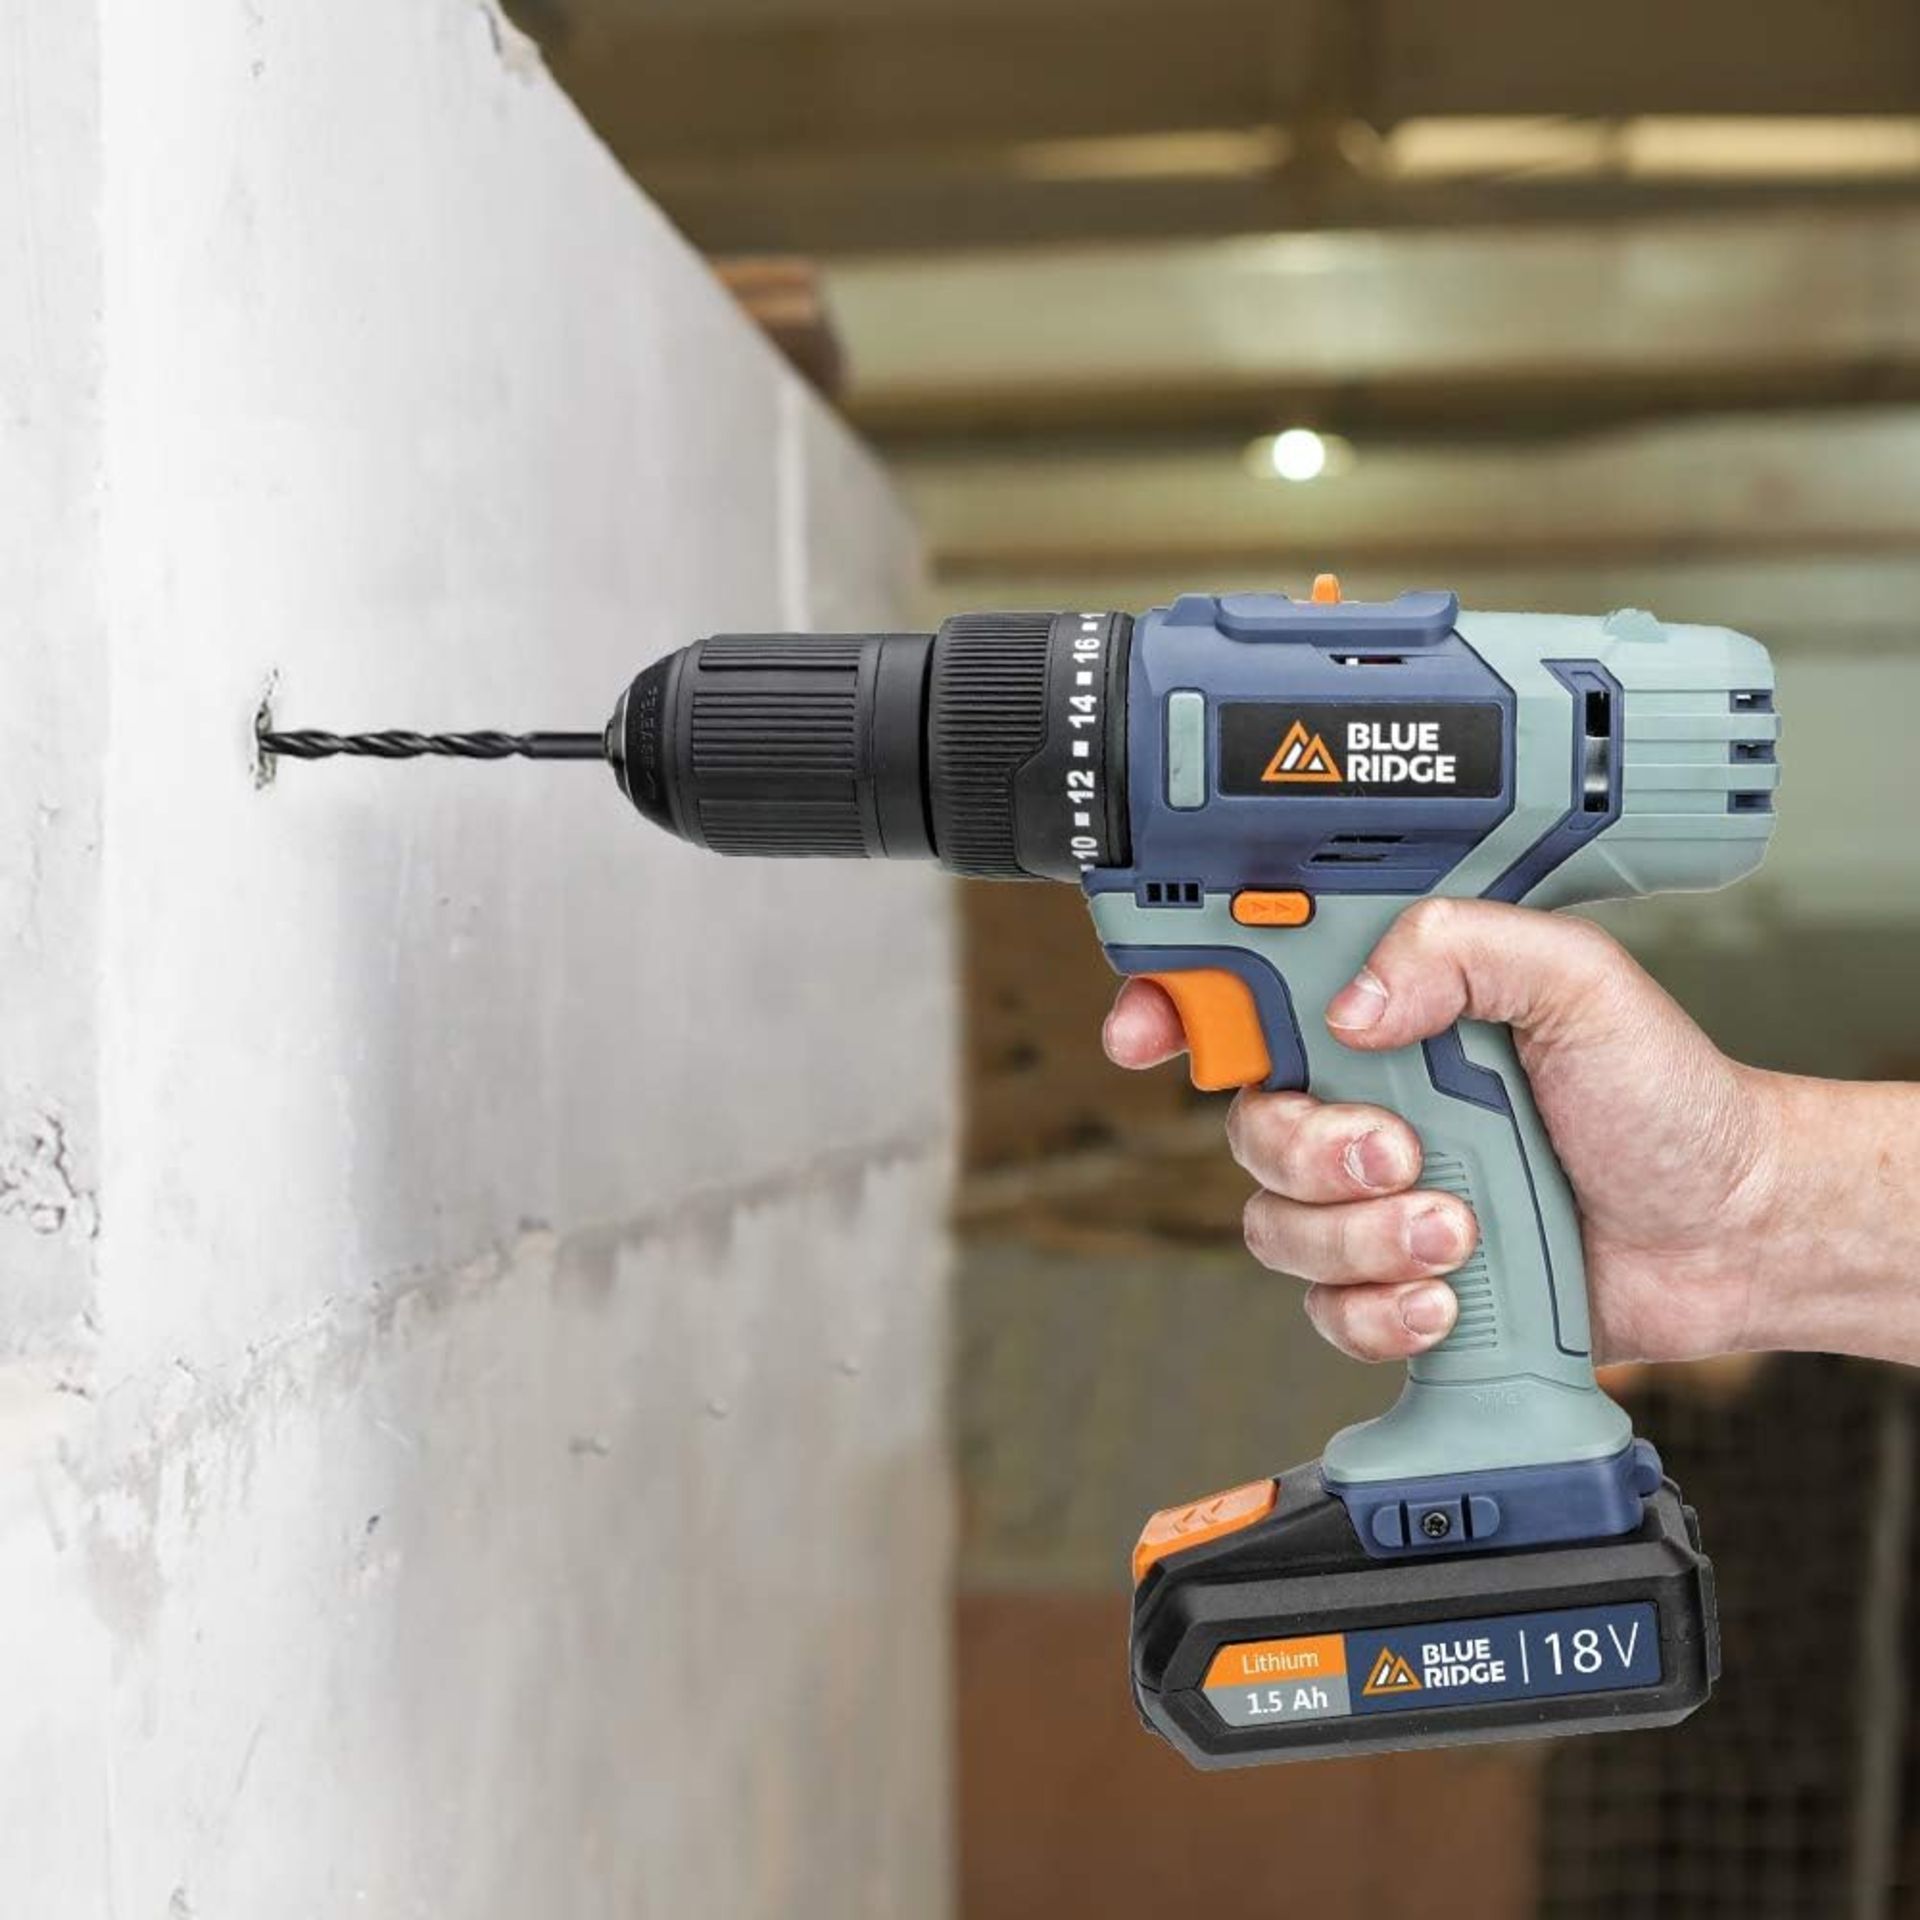 NEW & BOXED BLUE RIDGE 18V Cordless Hammer Drill with 2 x 1.5 Ah Li-ion Batteries & 43 Piece - Image 4 of 6